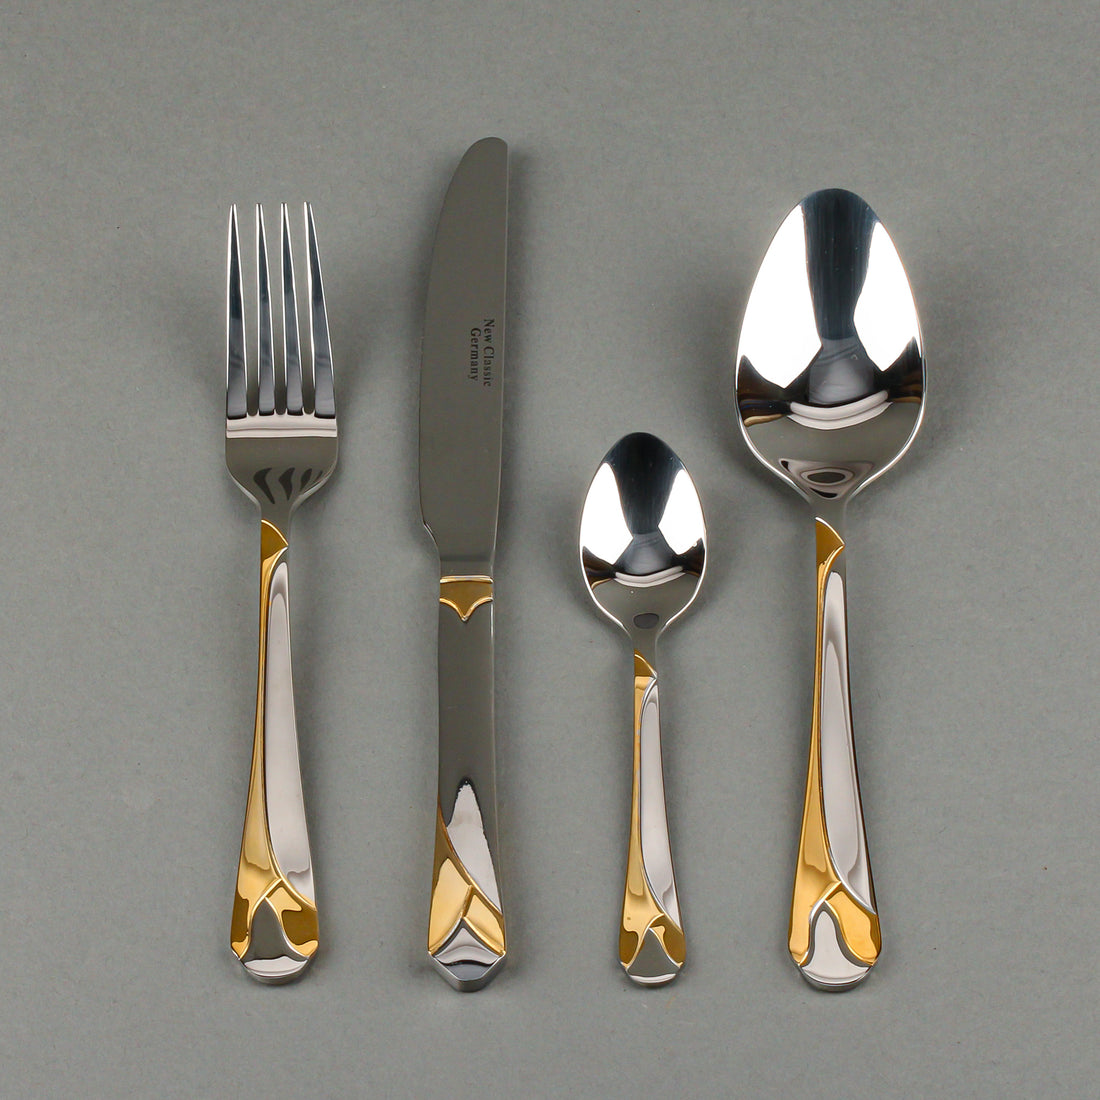 NEW CLASSIC Stainless Steel Flatware - 12 Place Settings +